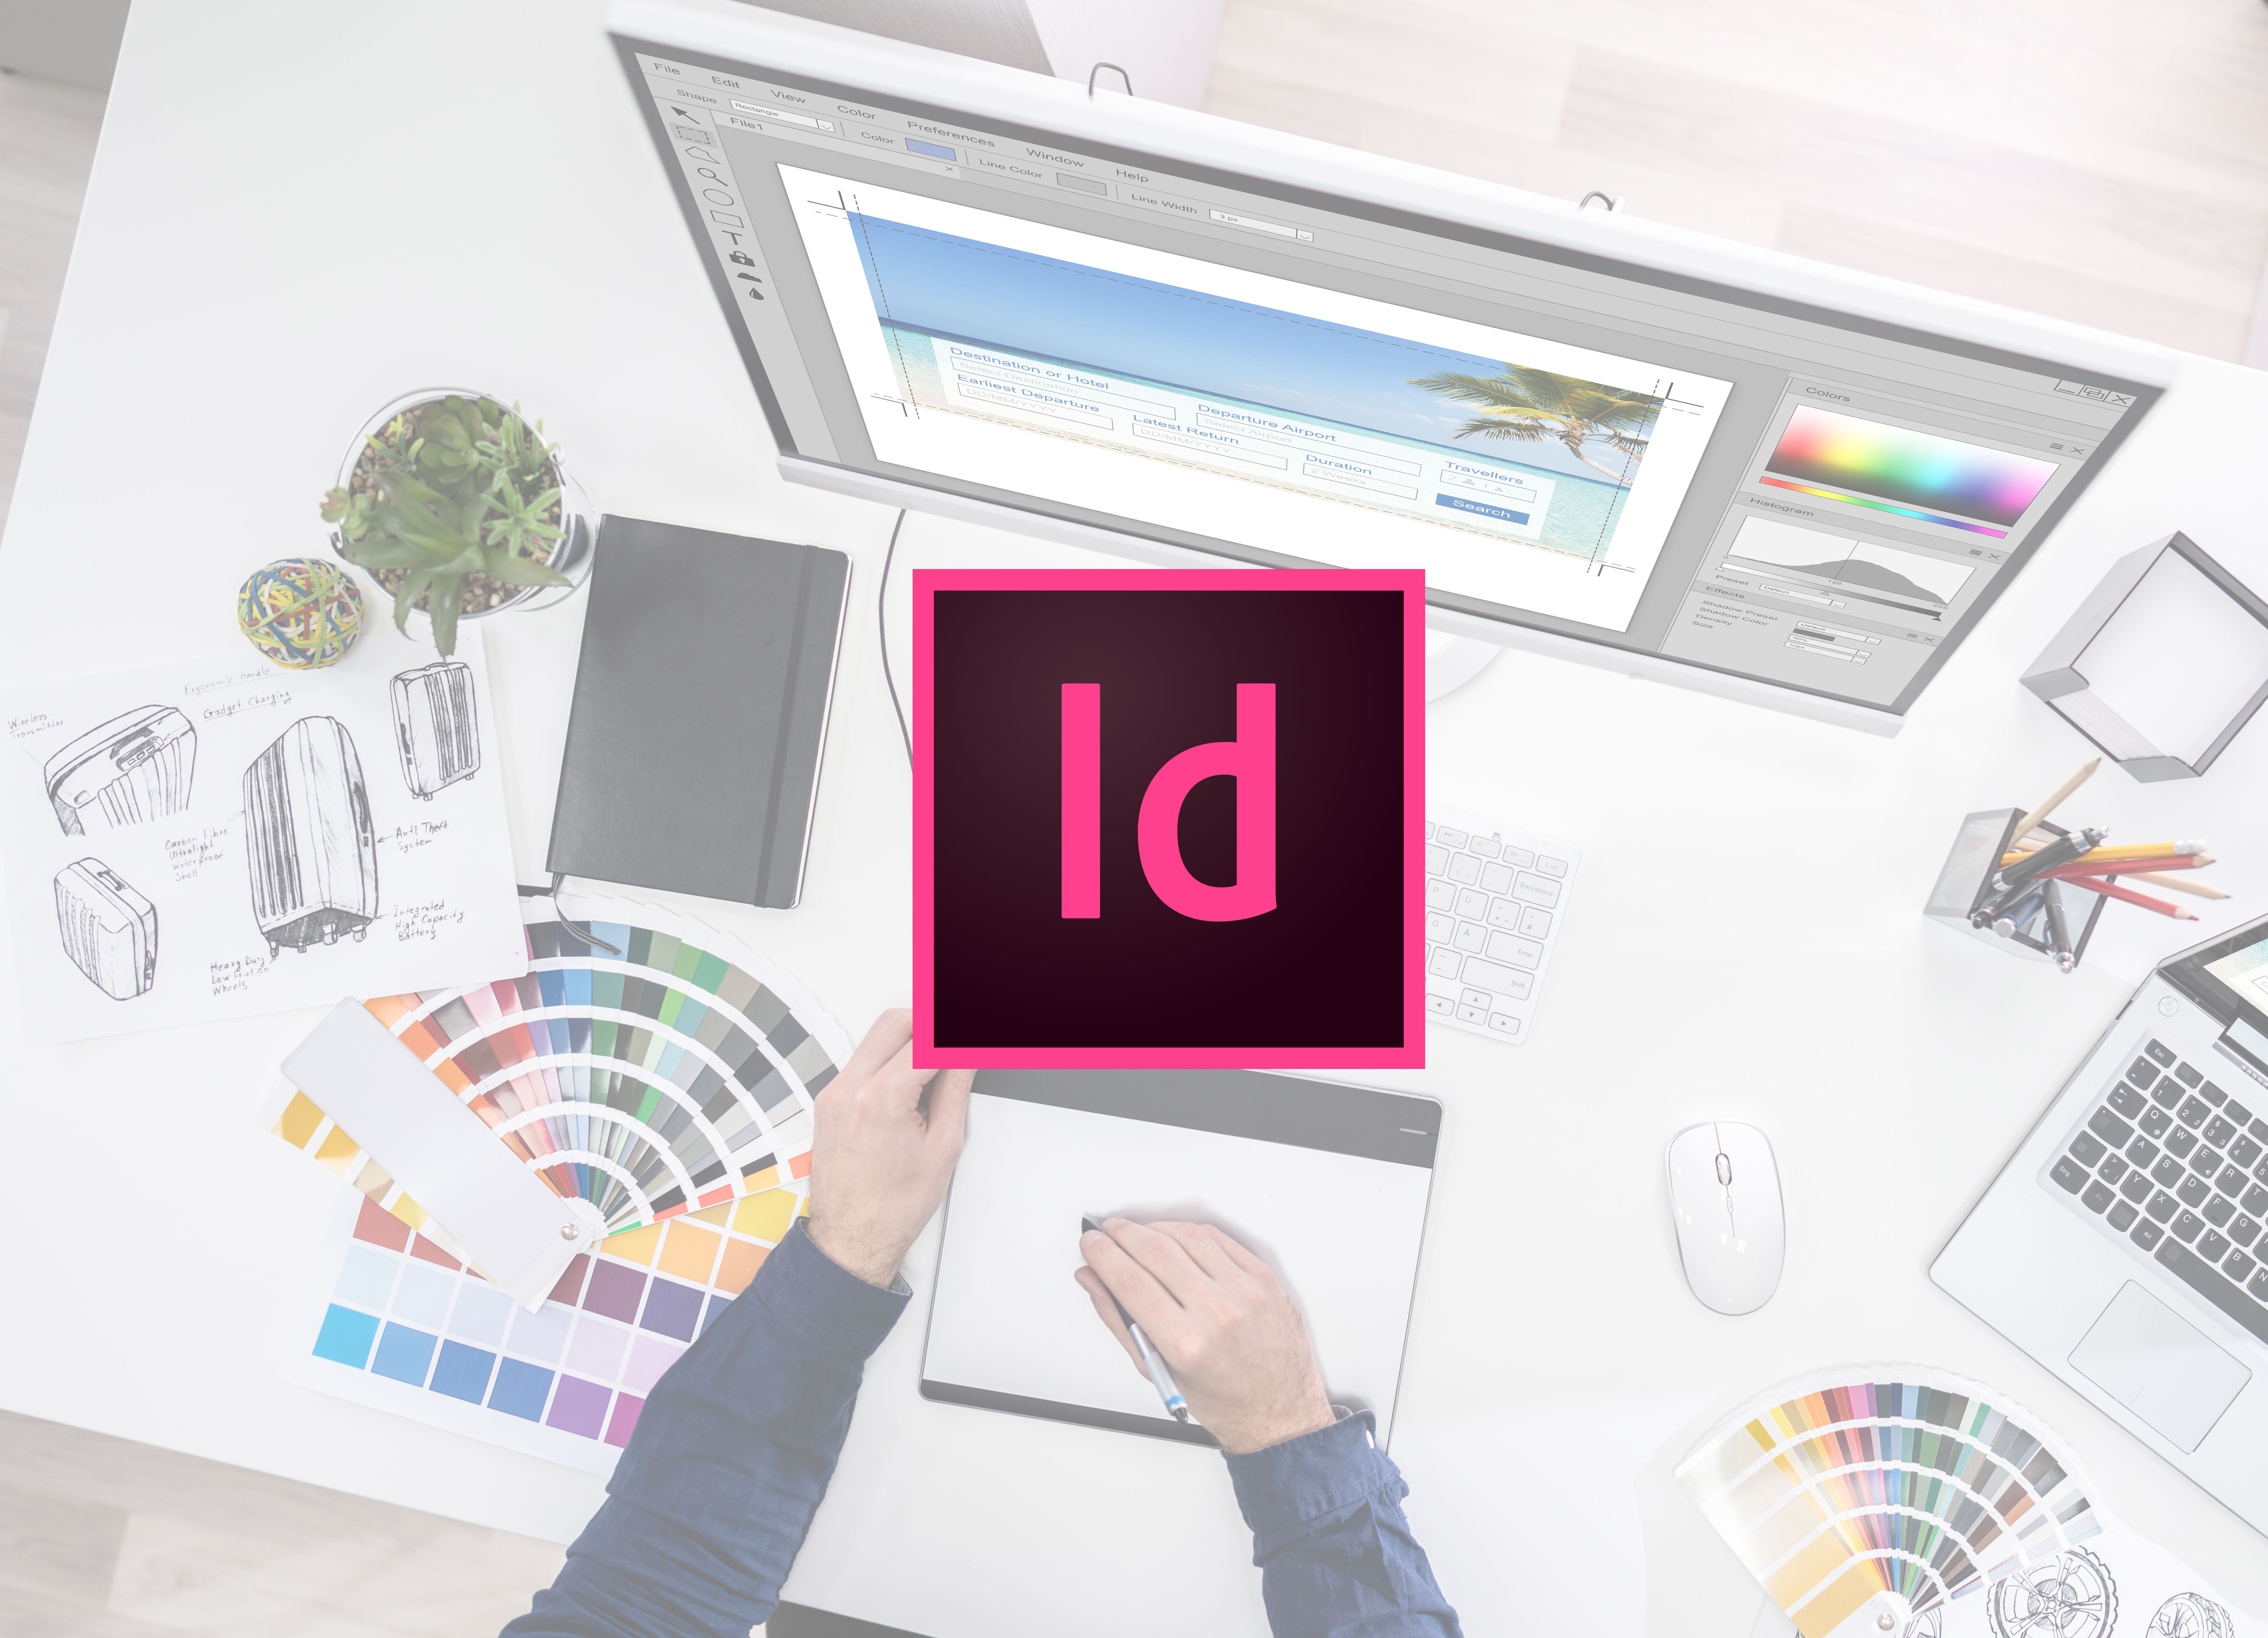 ai to indesign